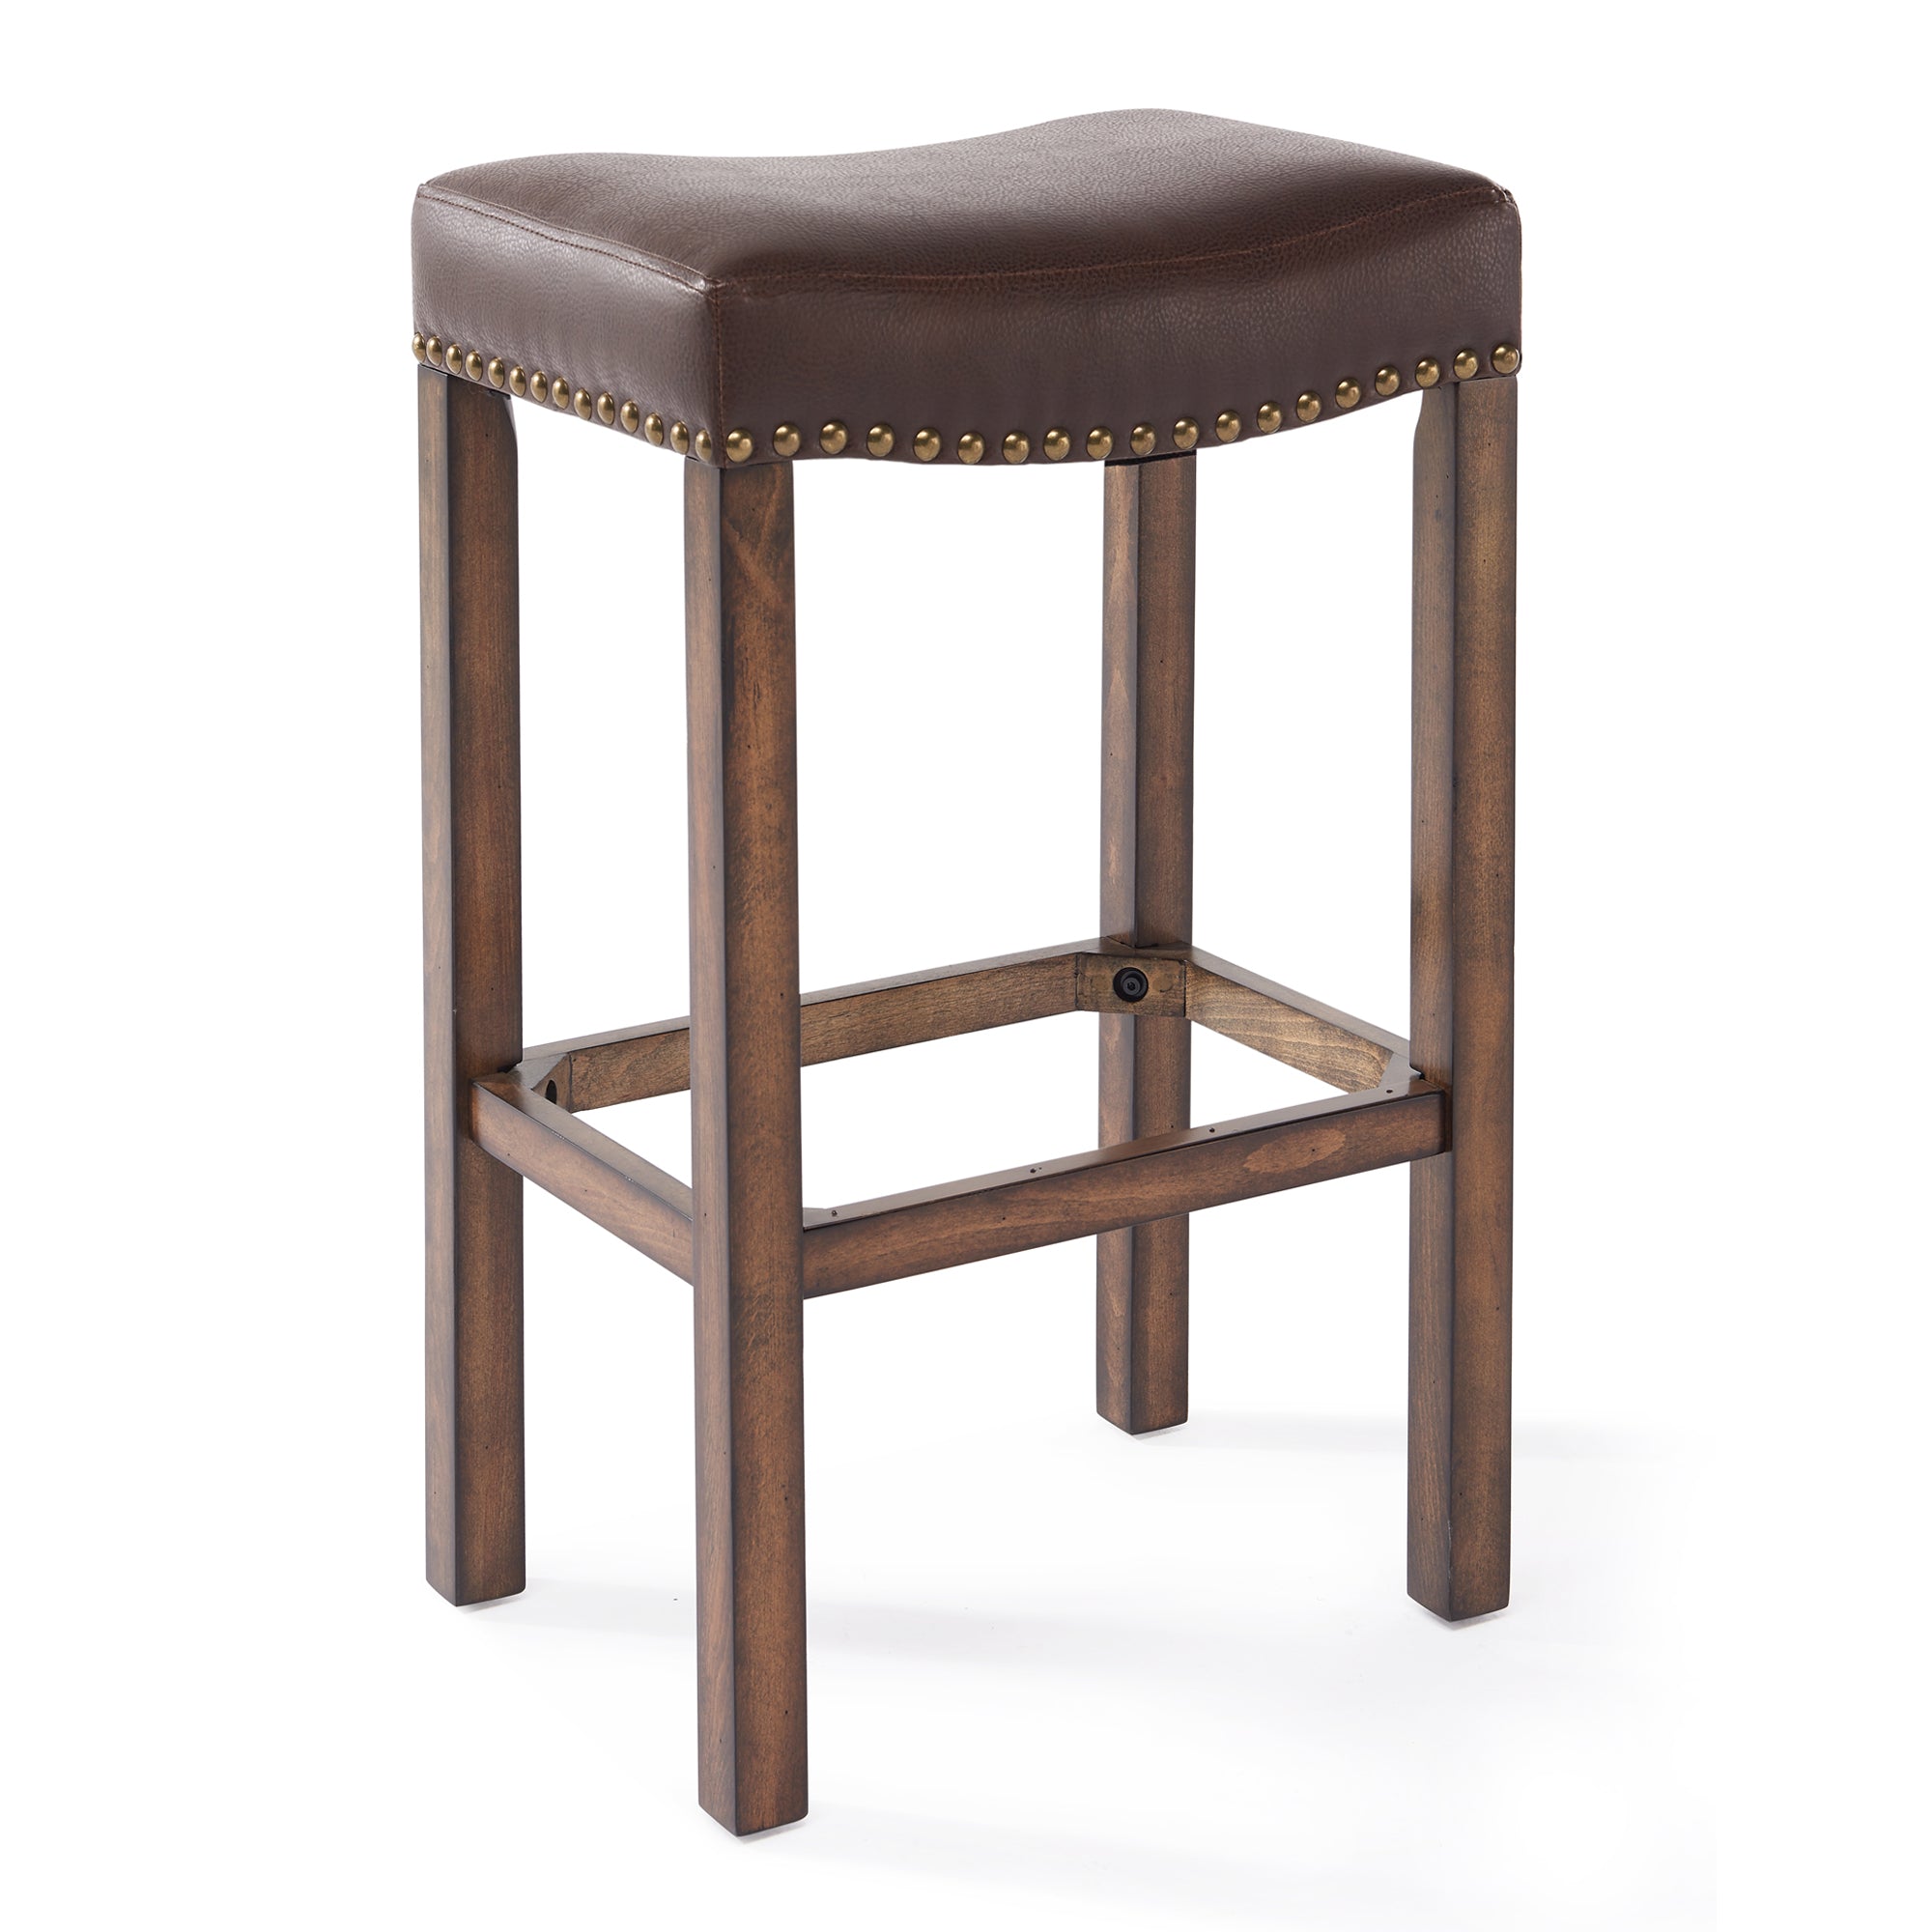 Armen Living Lcmbs013baka30 Tudor 30" Bar Height Wood Backless Barstool In Chestnut Finish And Kahlua Faux Leather